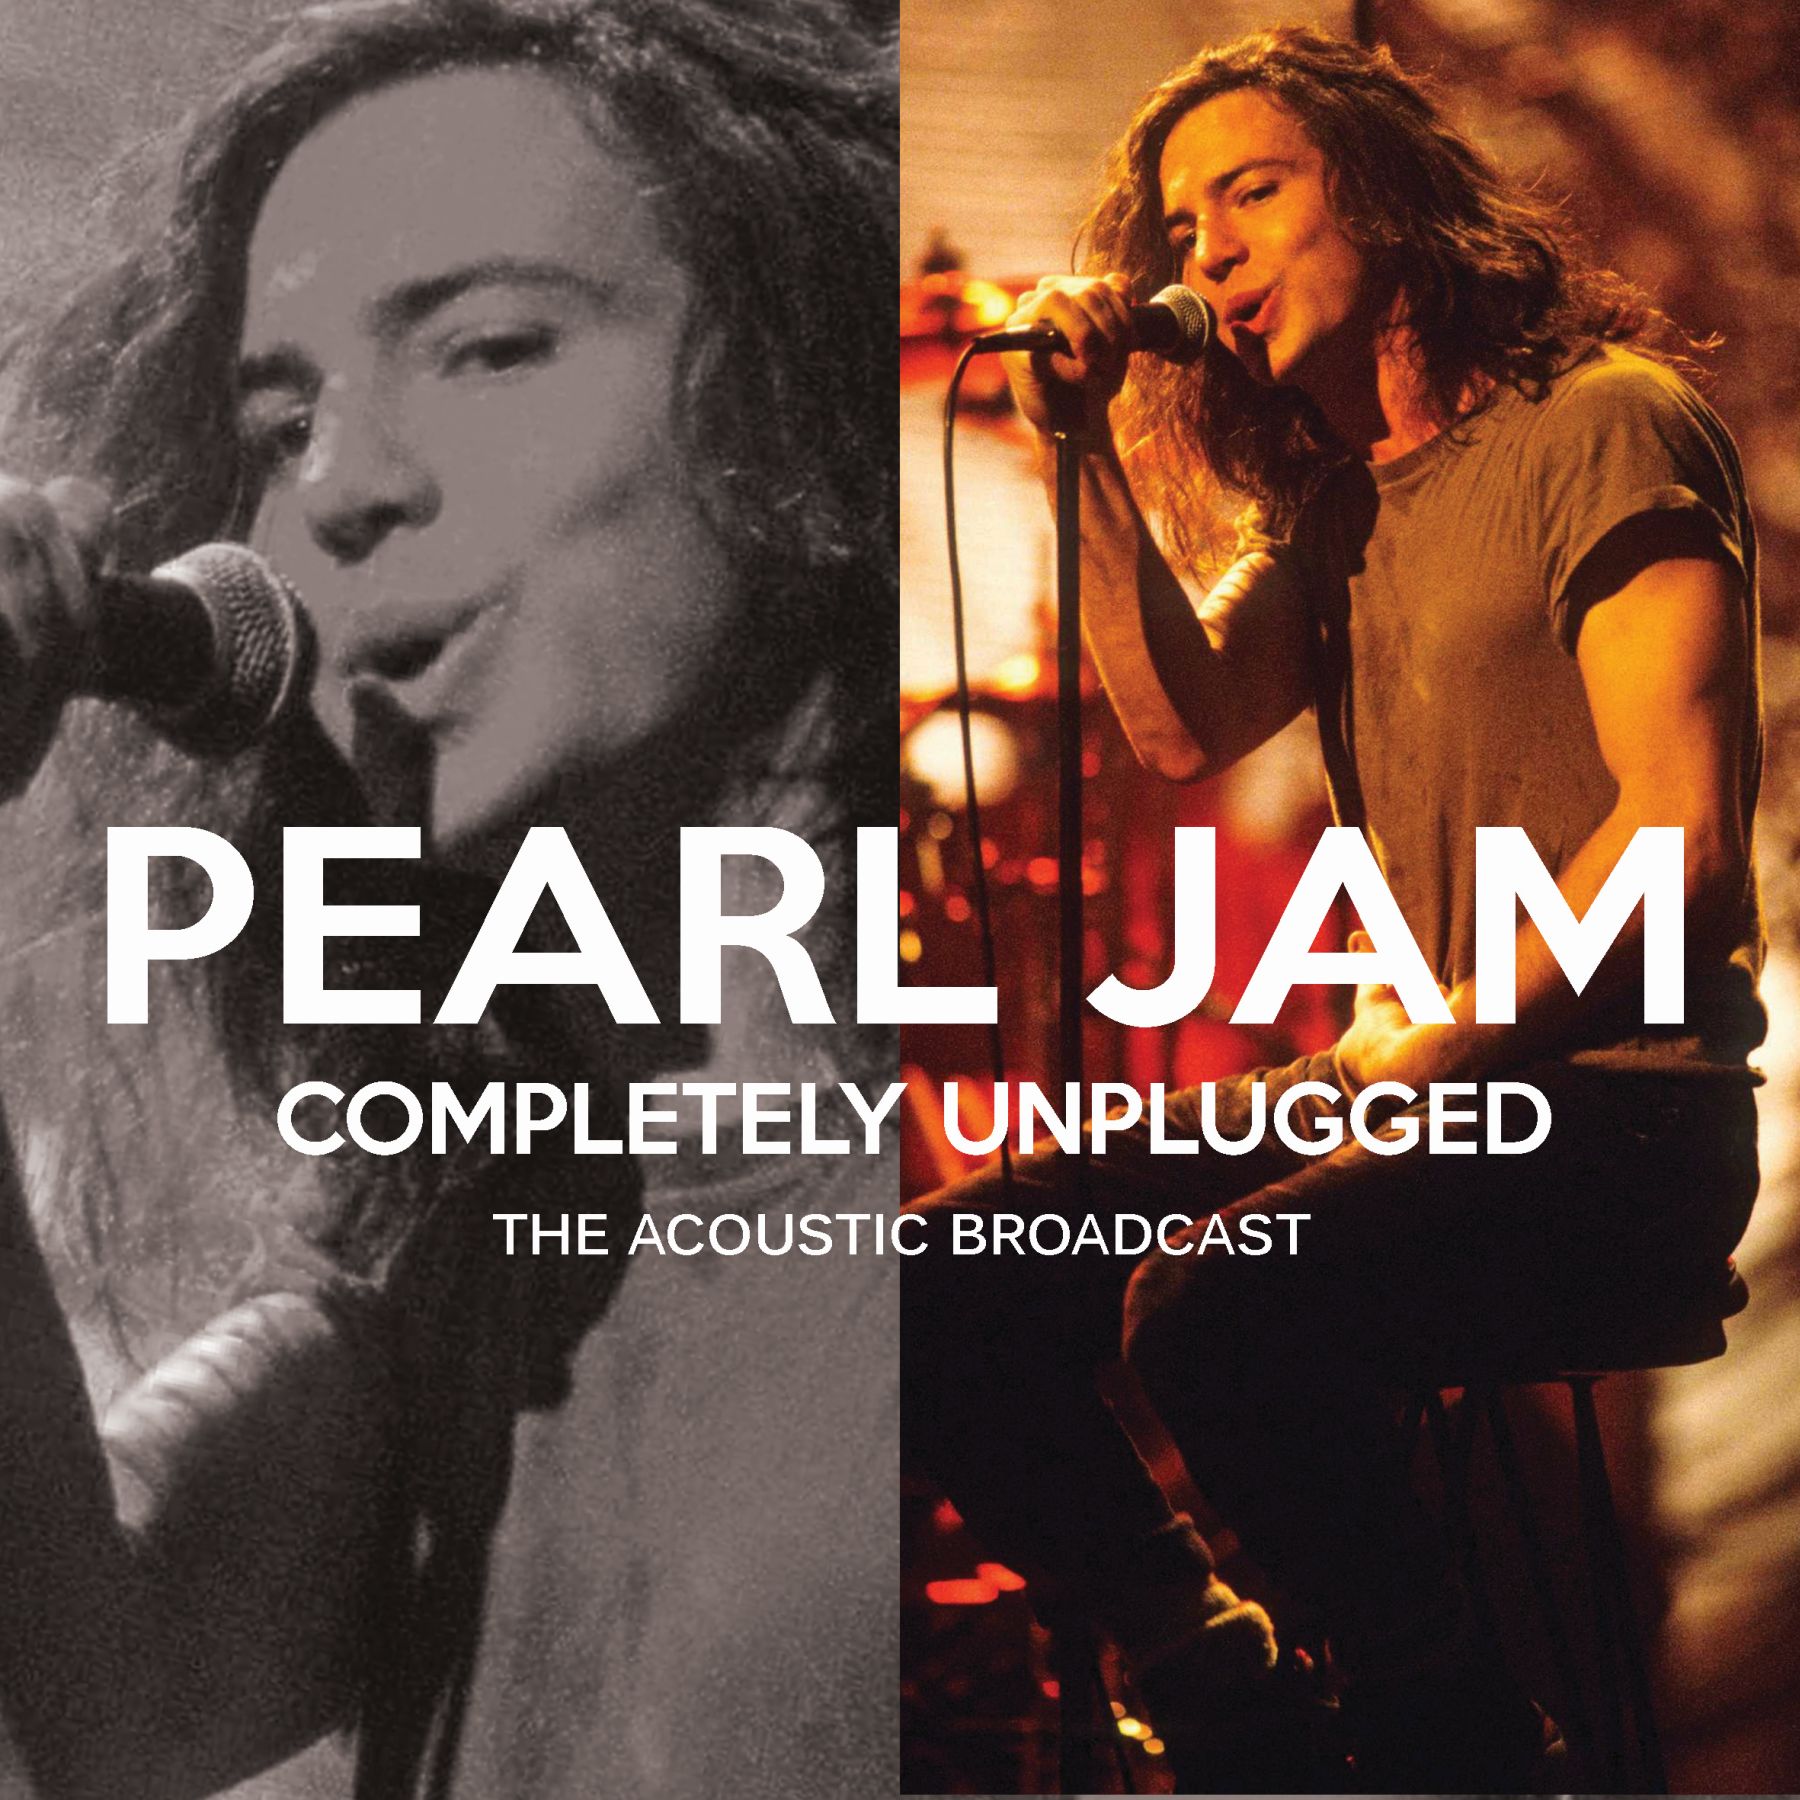 what are some songs by pearl jam